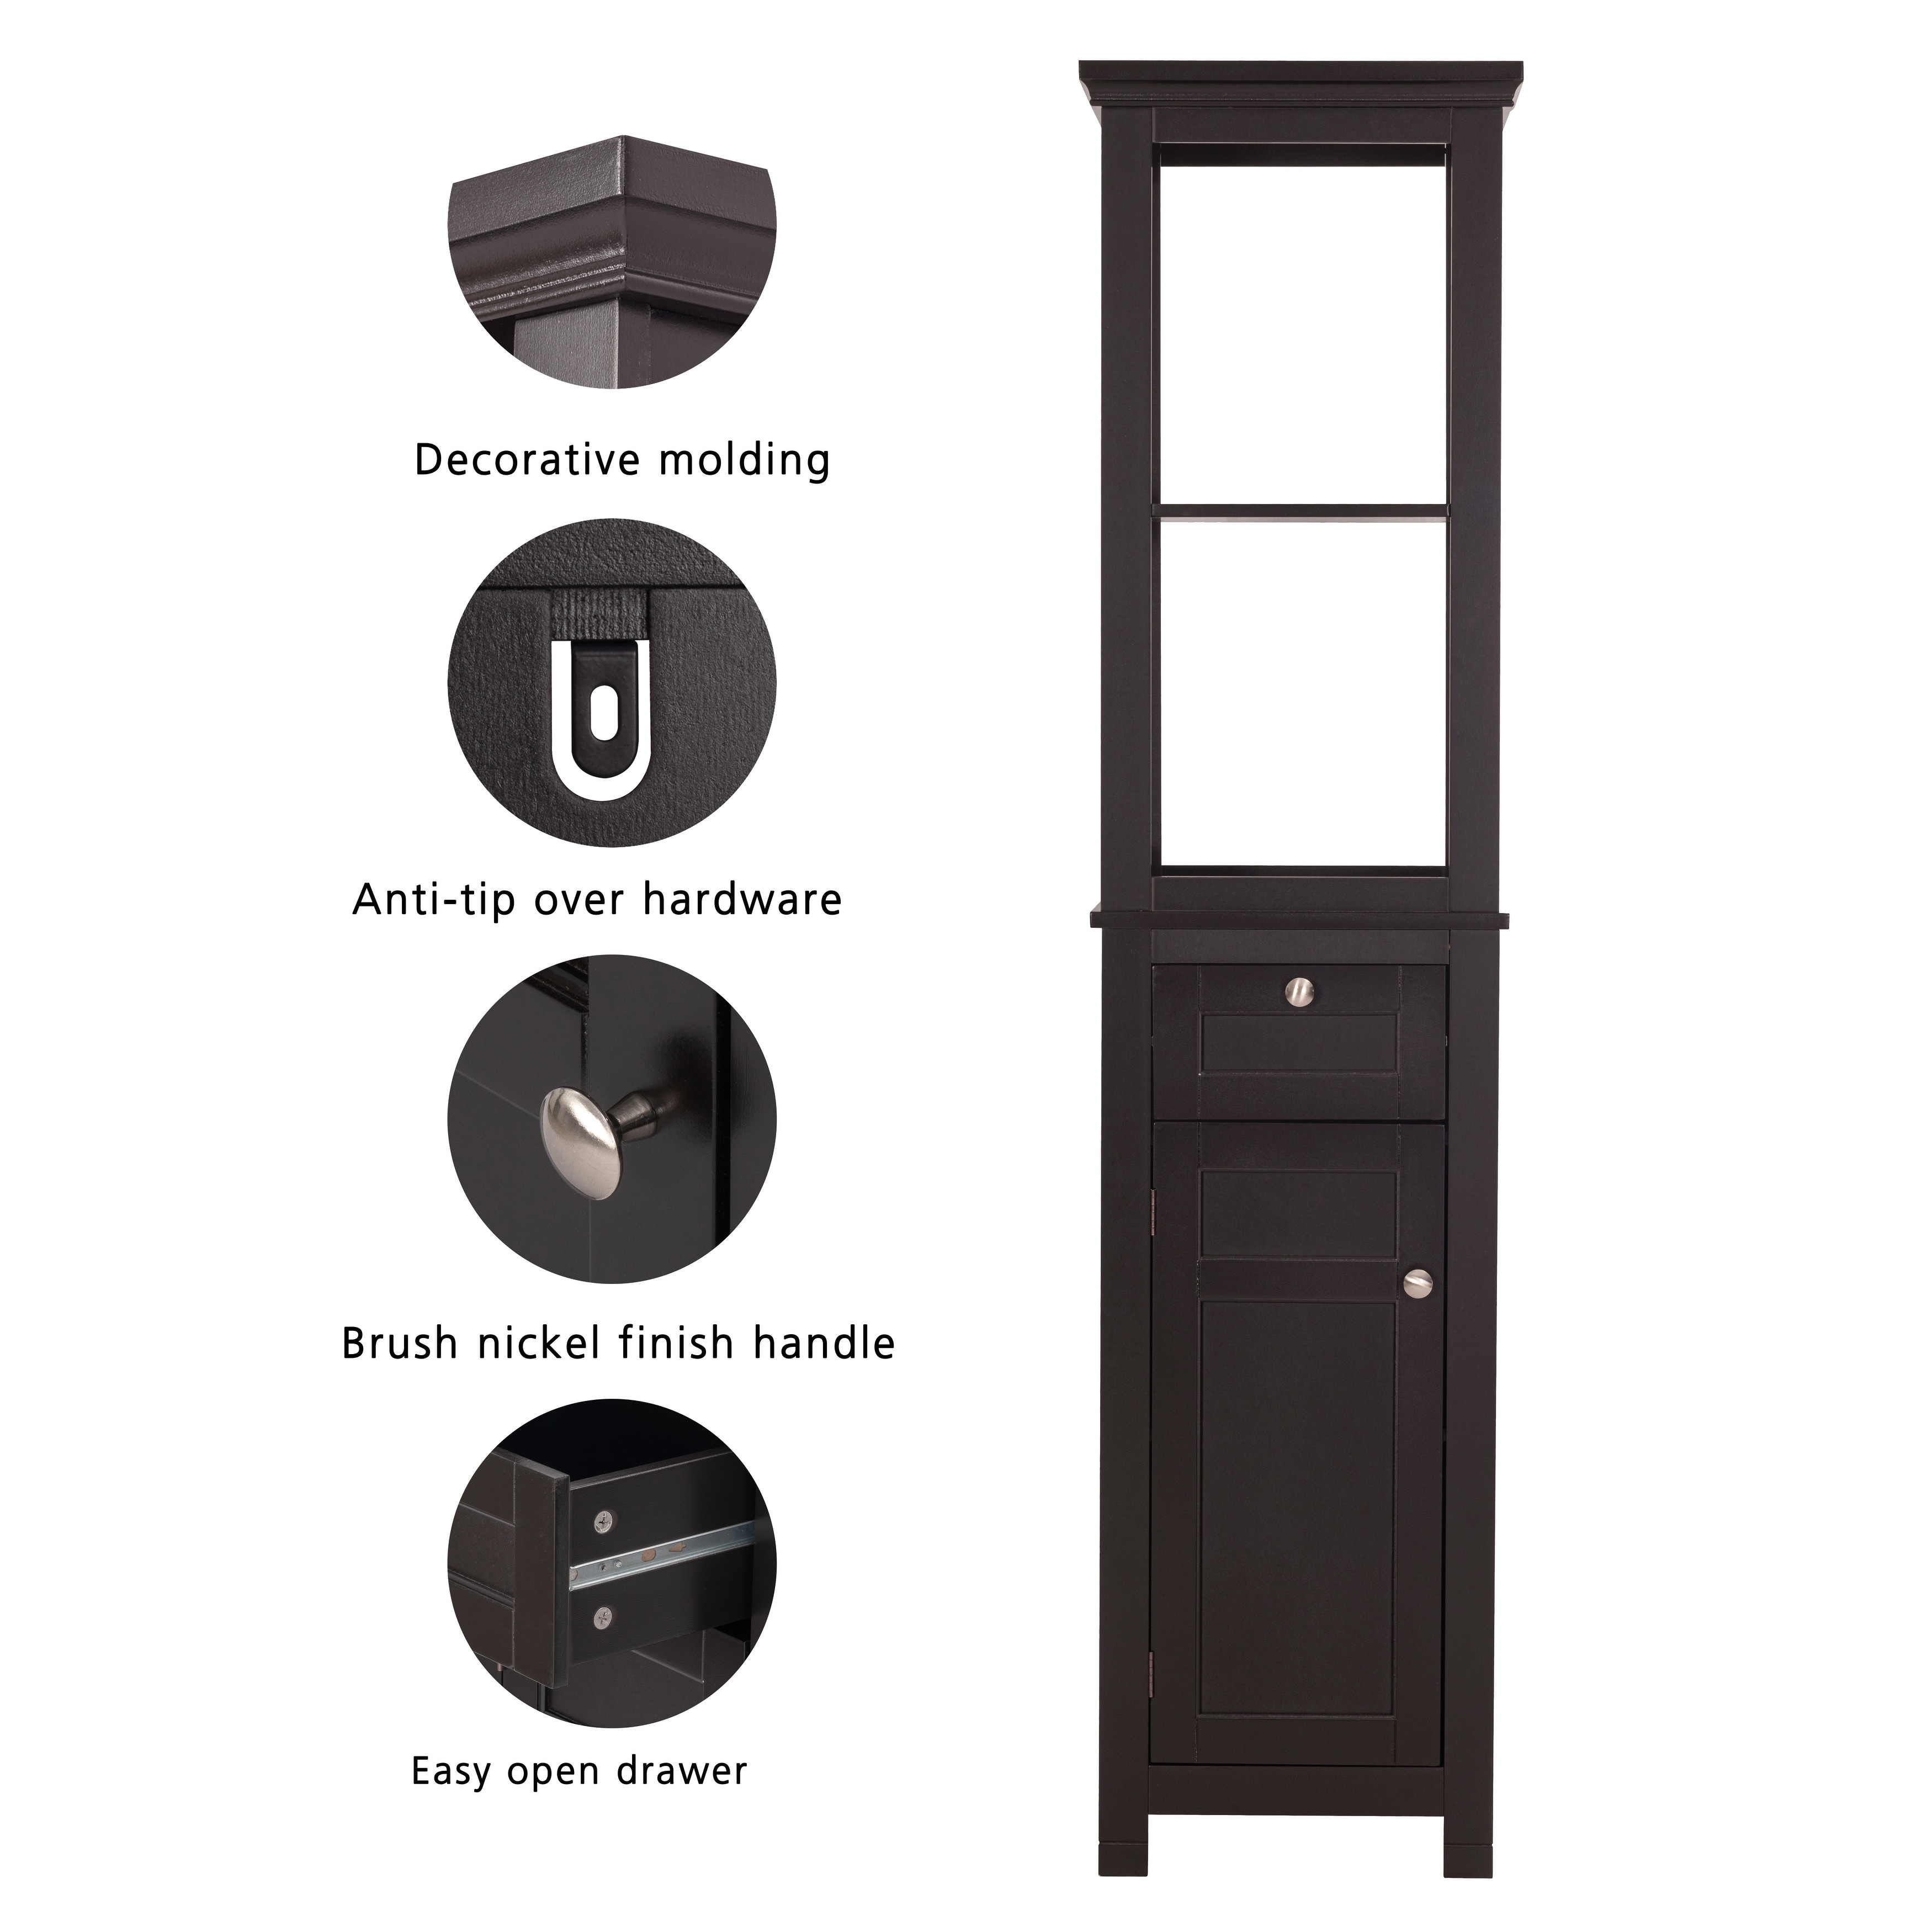 Spirich-Bathroom Wall Spacesaver Storage Cabinet Over The Toilet with Door  , Wooden, White - On Sale - Bed Bath & Beyond - 32620437